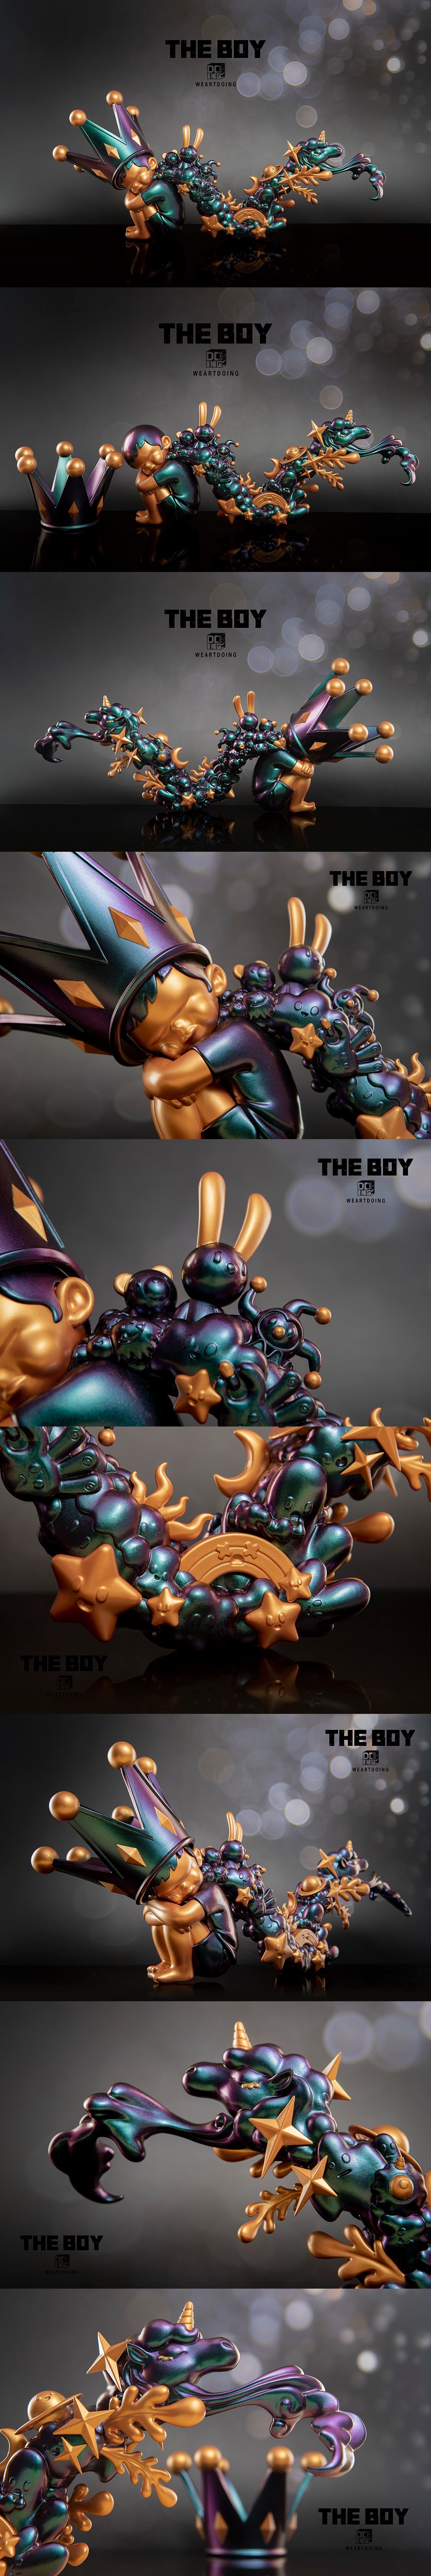 The Boy-Dreams-Galaxy Fantasy Size：13.3cm,48.7cm,21.4cm（Height） Limit Edition：99Sets Materials：Resin